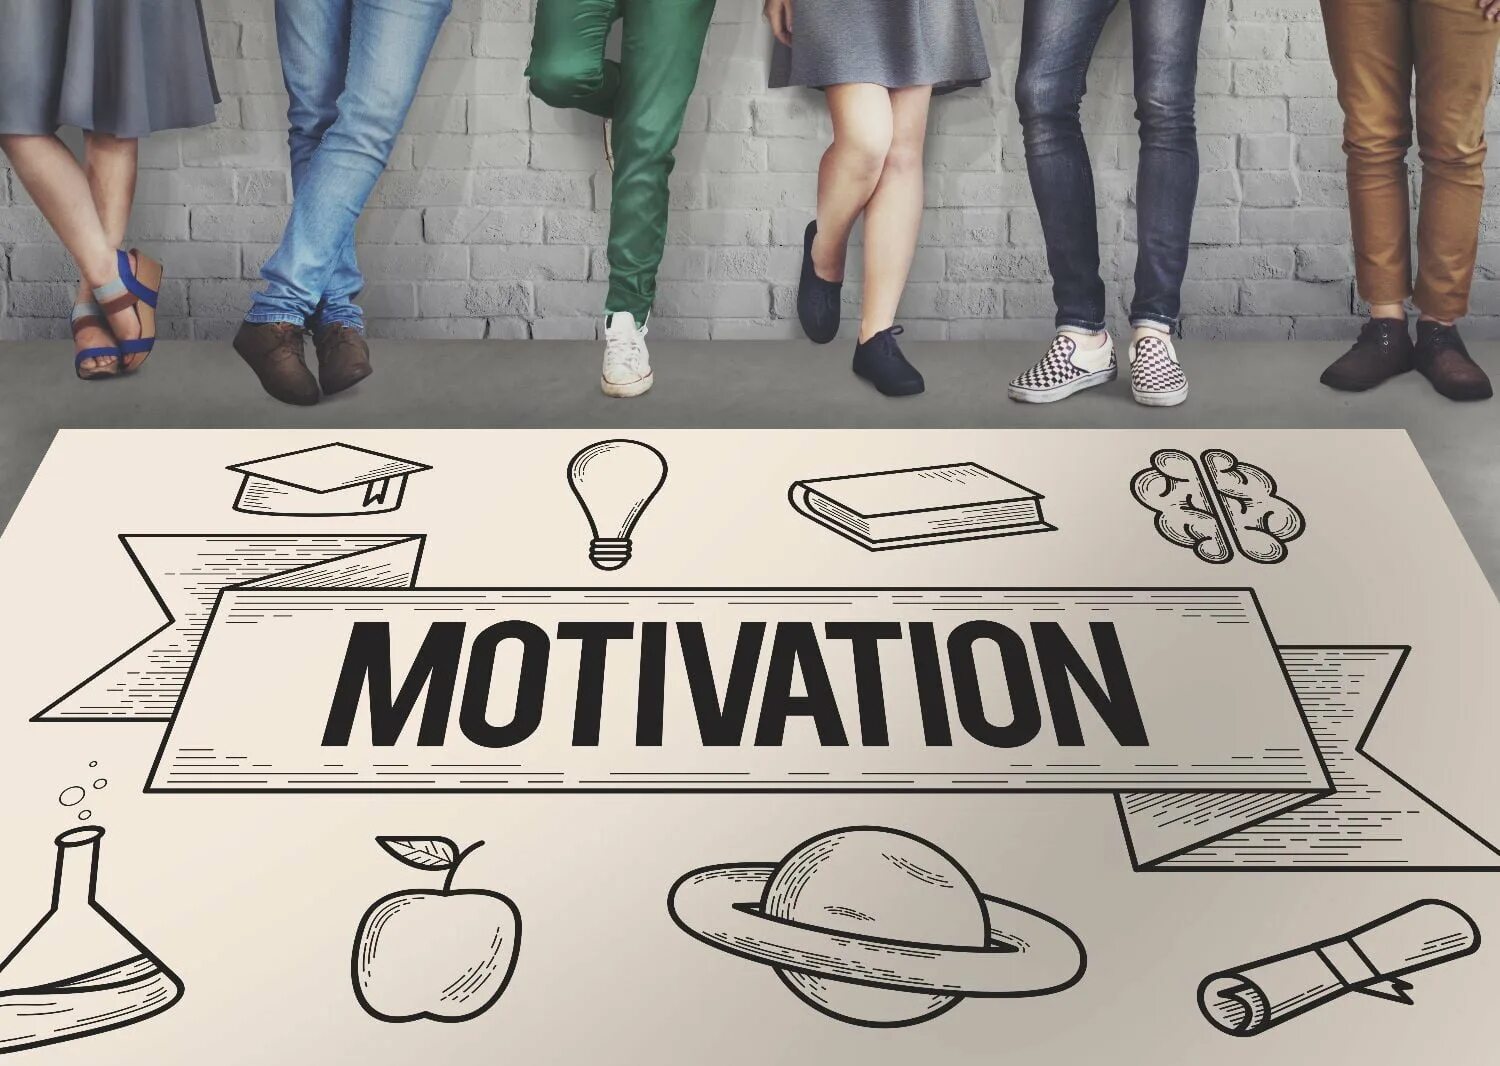 Motivated learning. Learning Motivation. Motivation in English language Learning. Motivation in language Learning. Motivation for Learning languages.